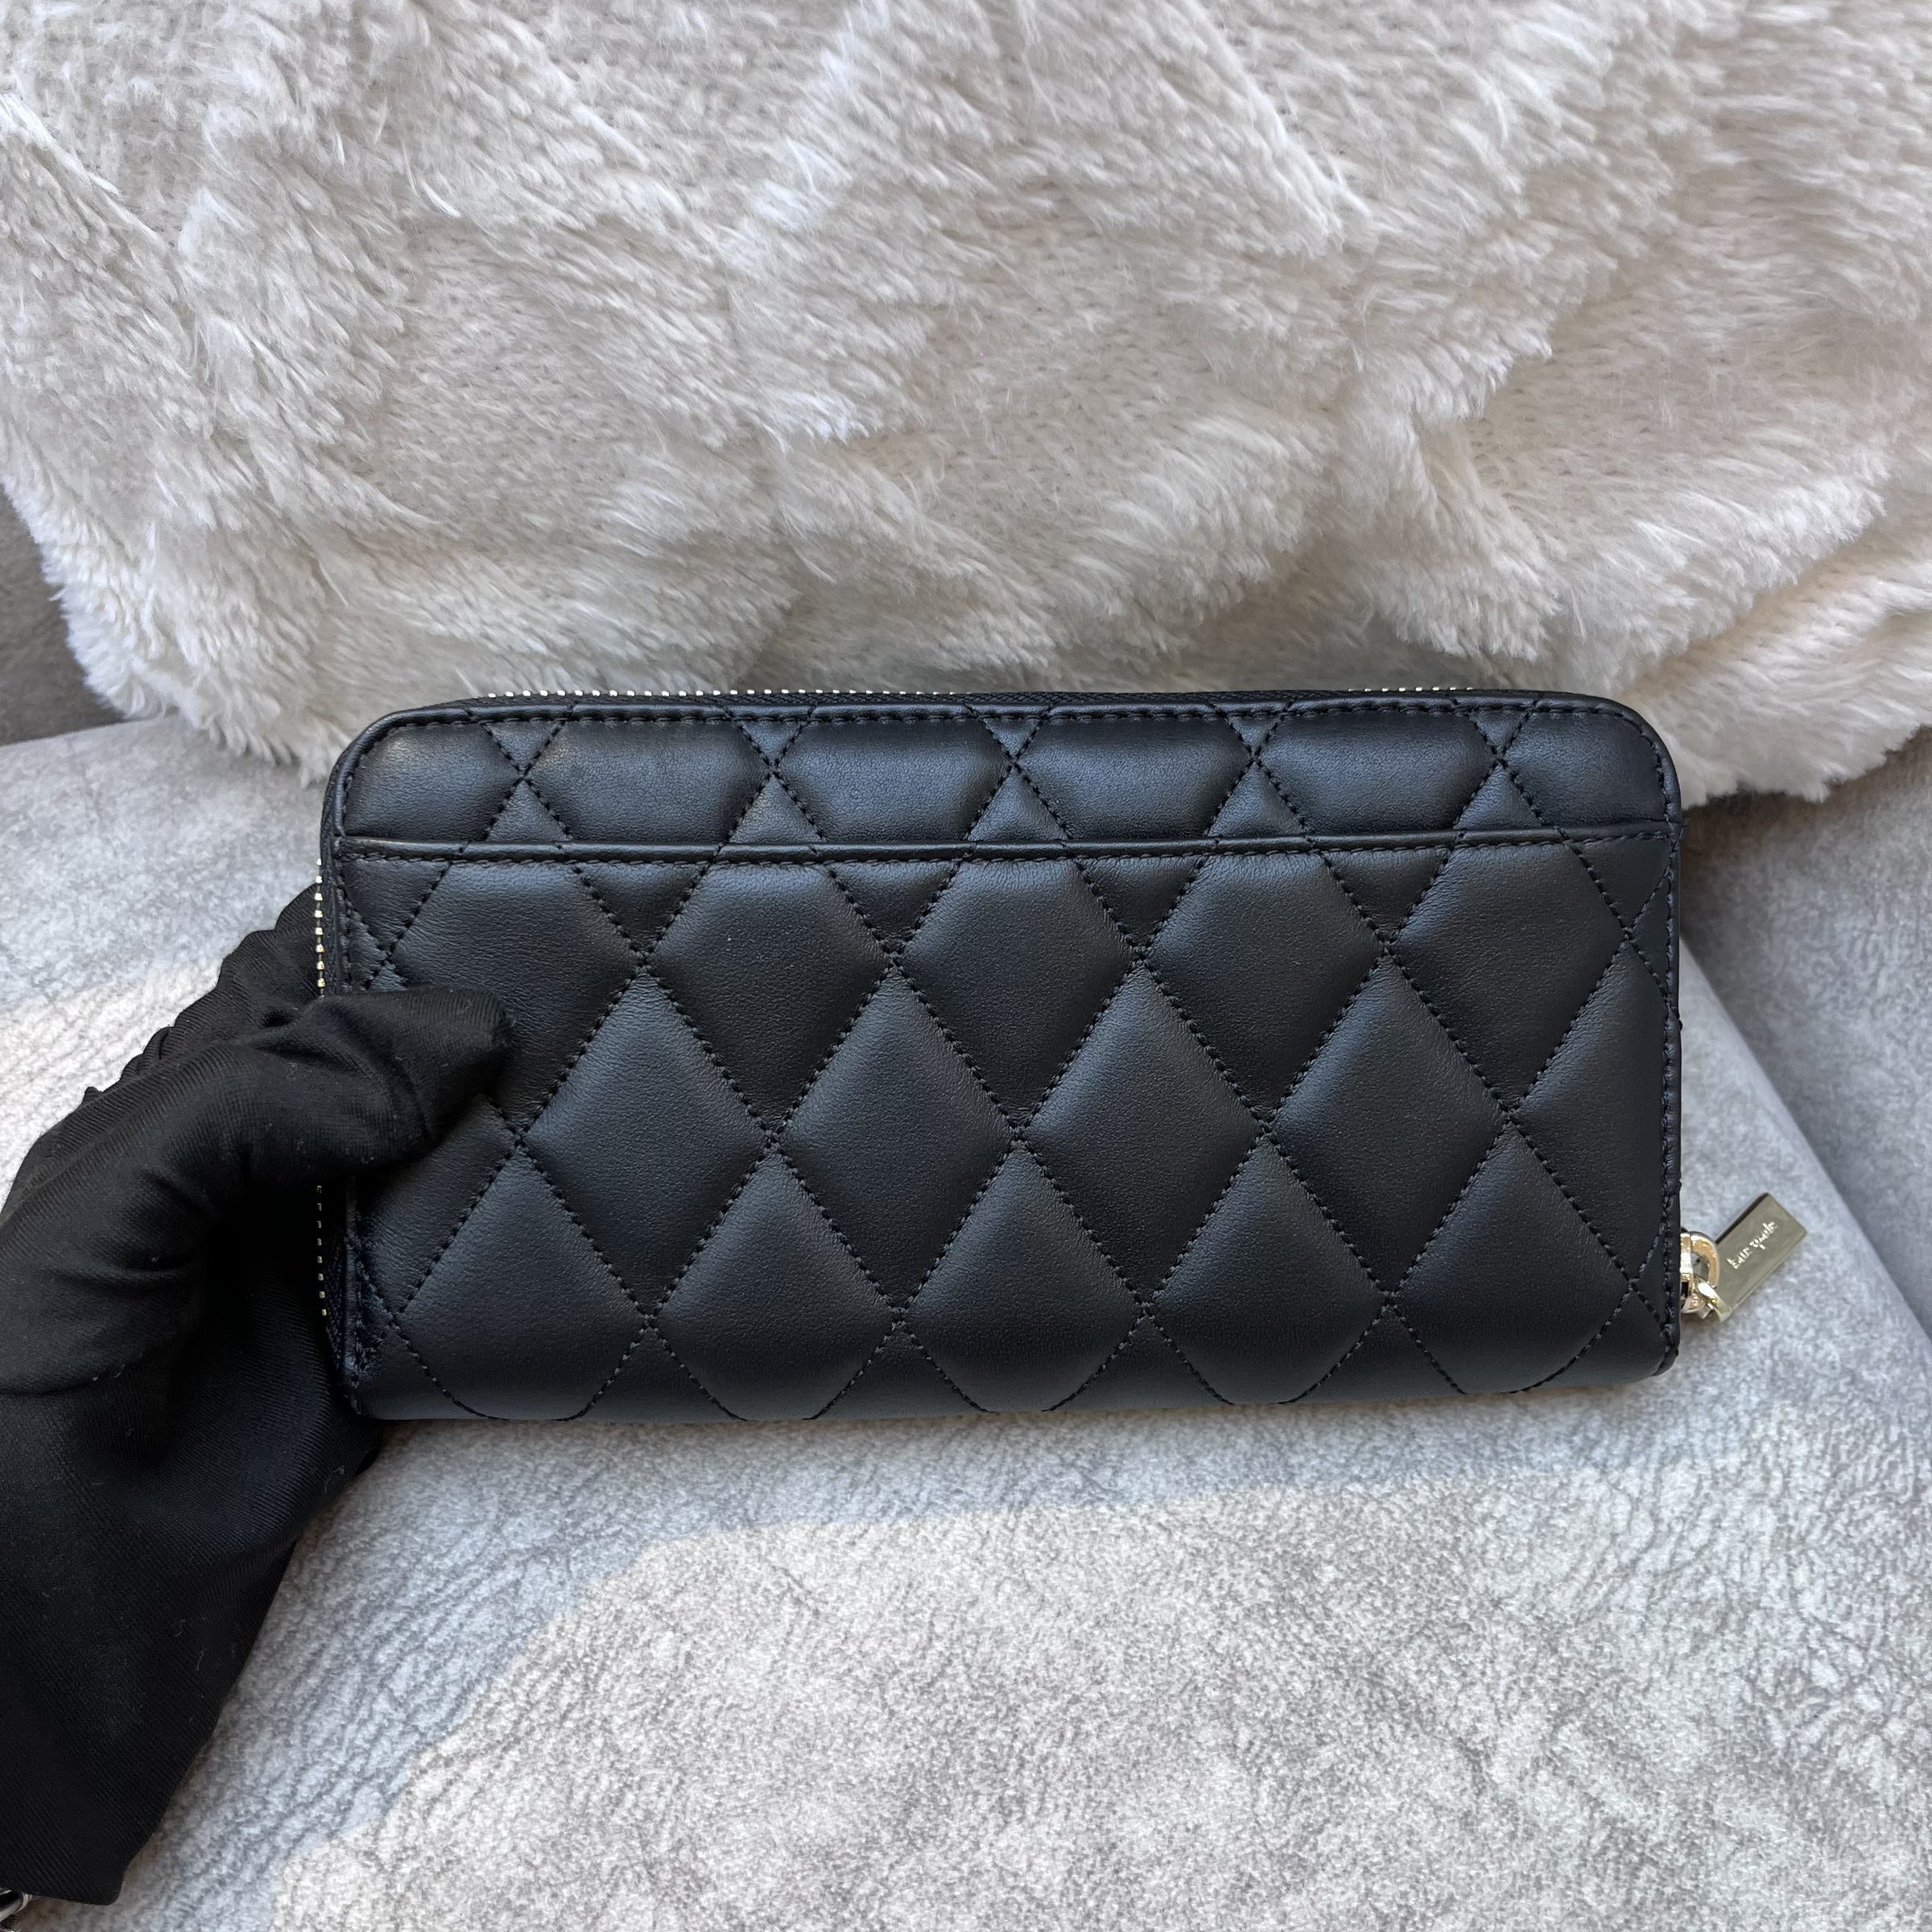 Carey Large Continental Wallet